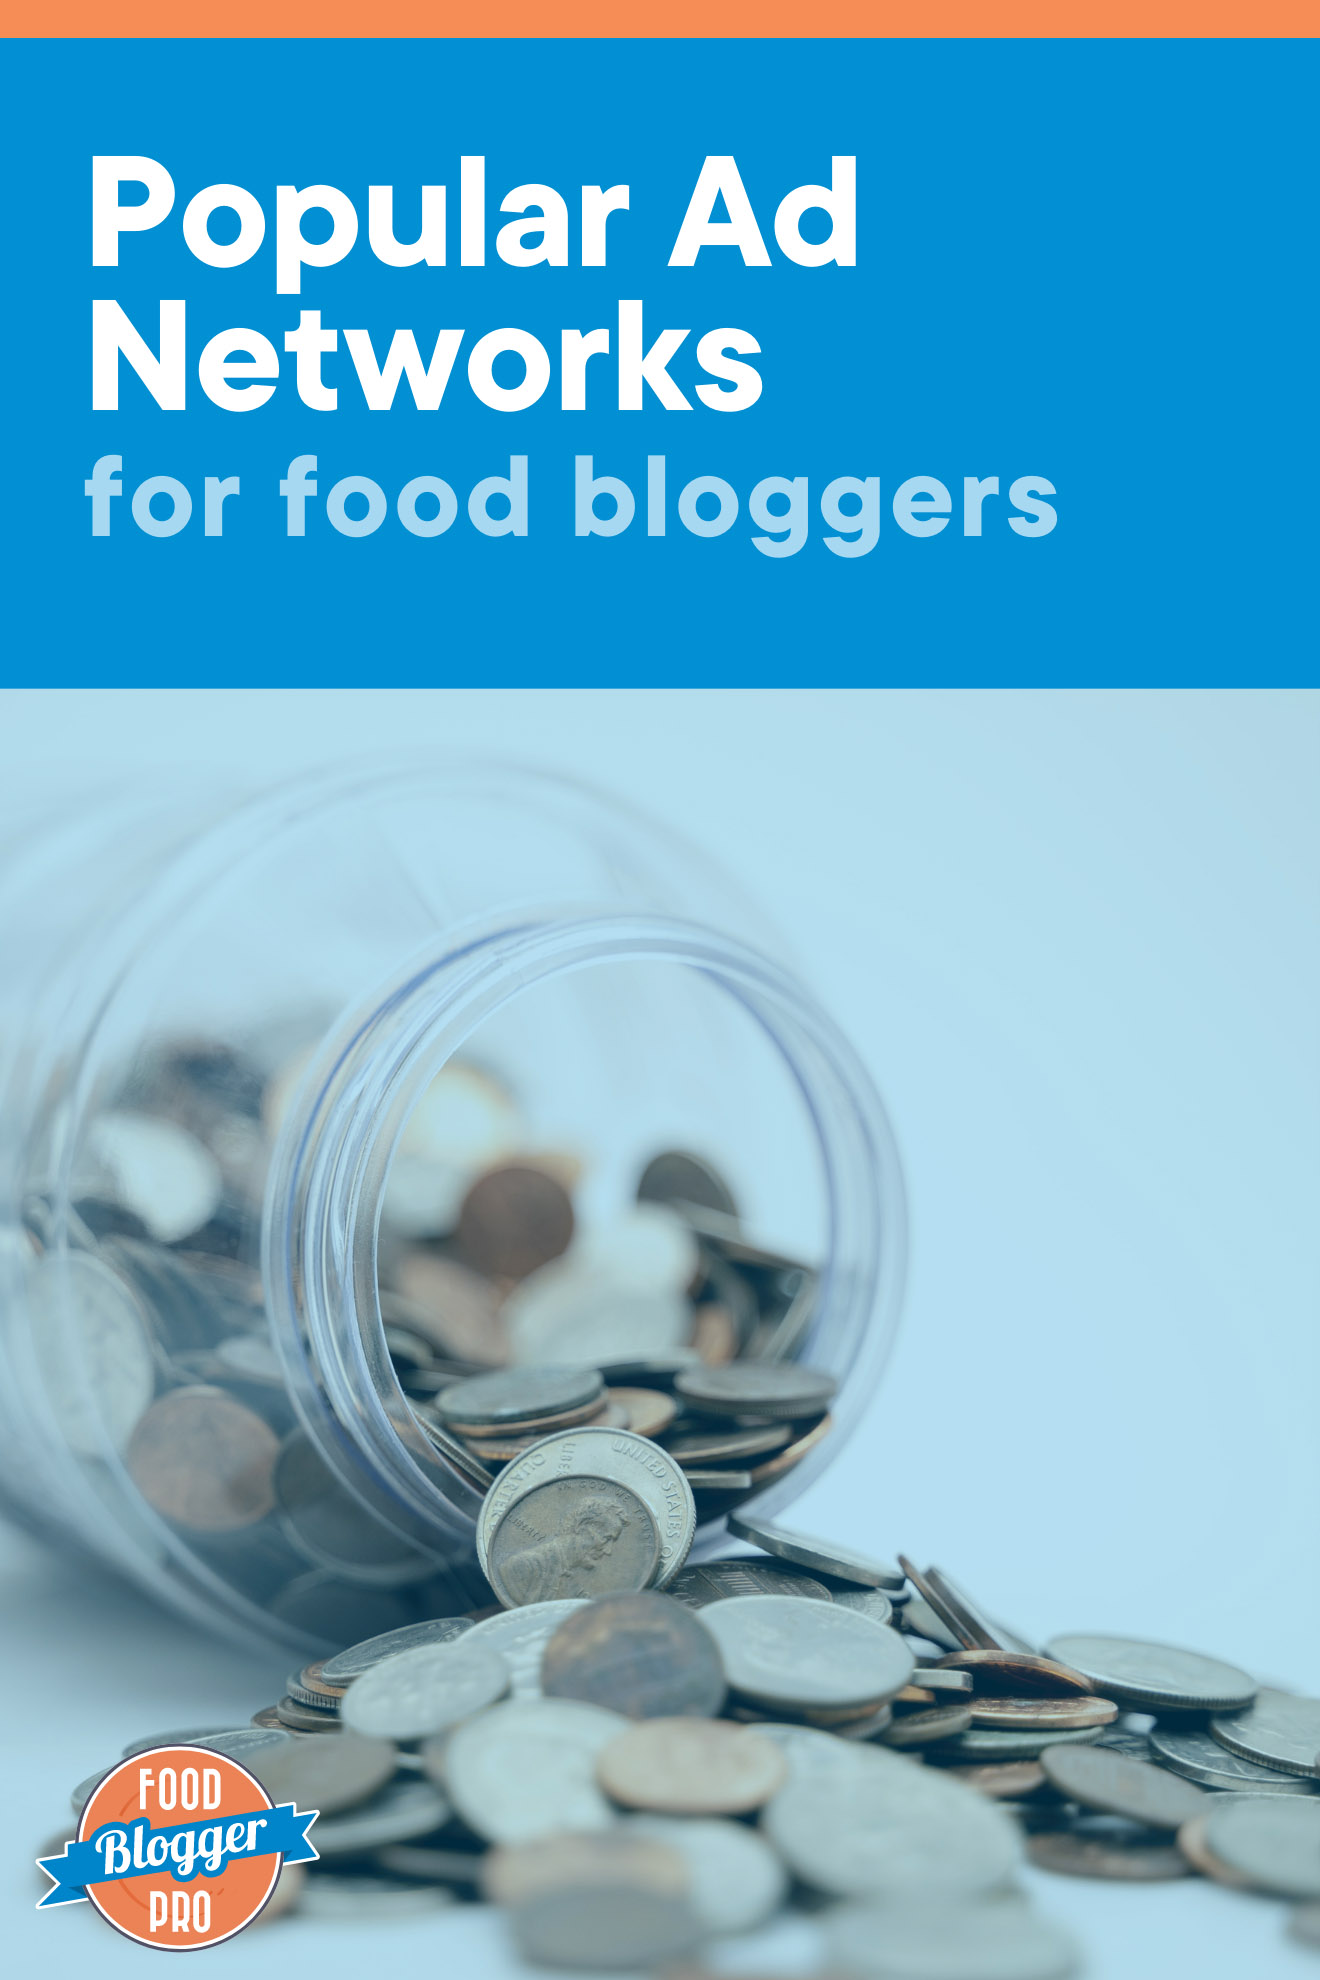 Photo of change pouring out of a jar that reads 'Popular Ad Networks for Food Bloggers' with the Food Blogger Pro logo